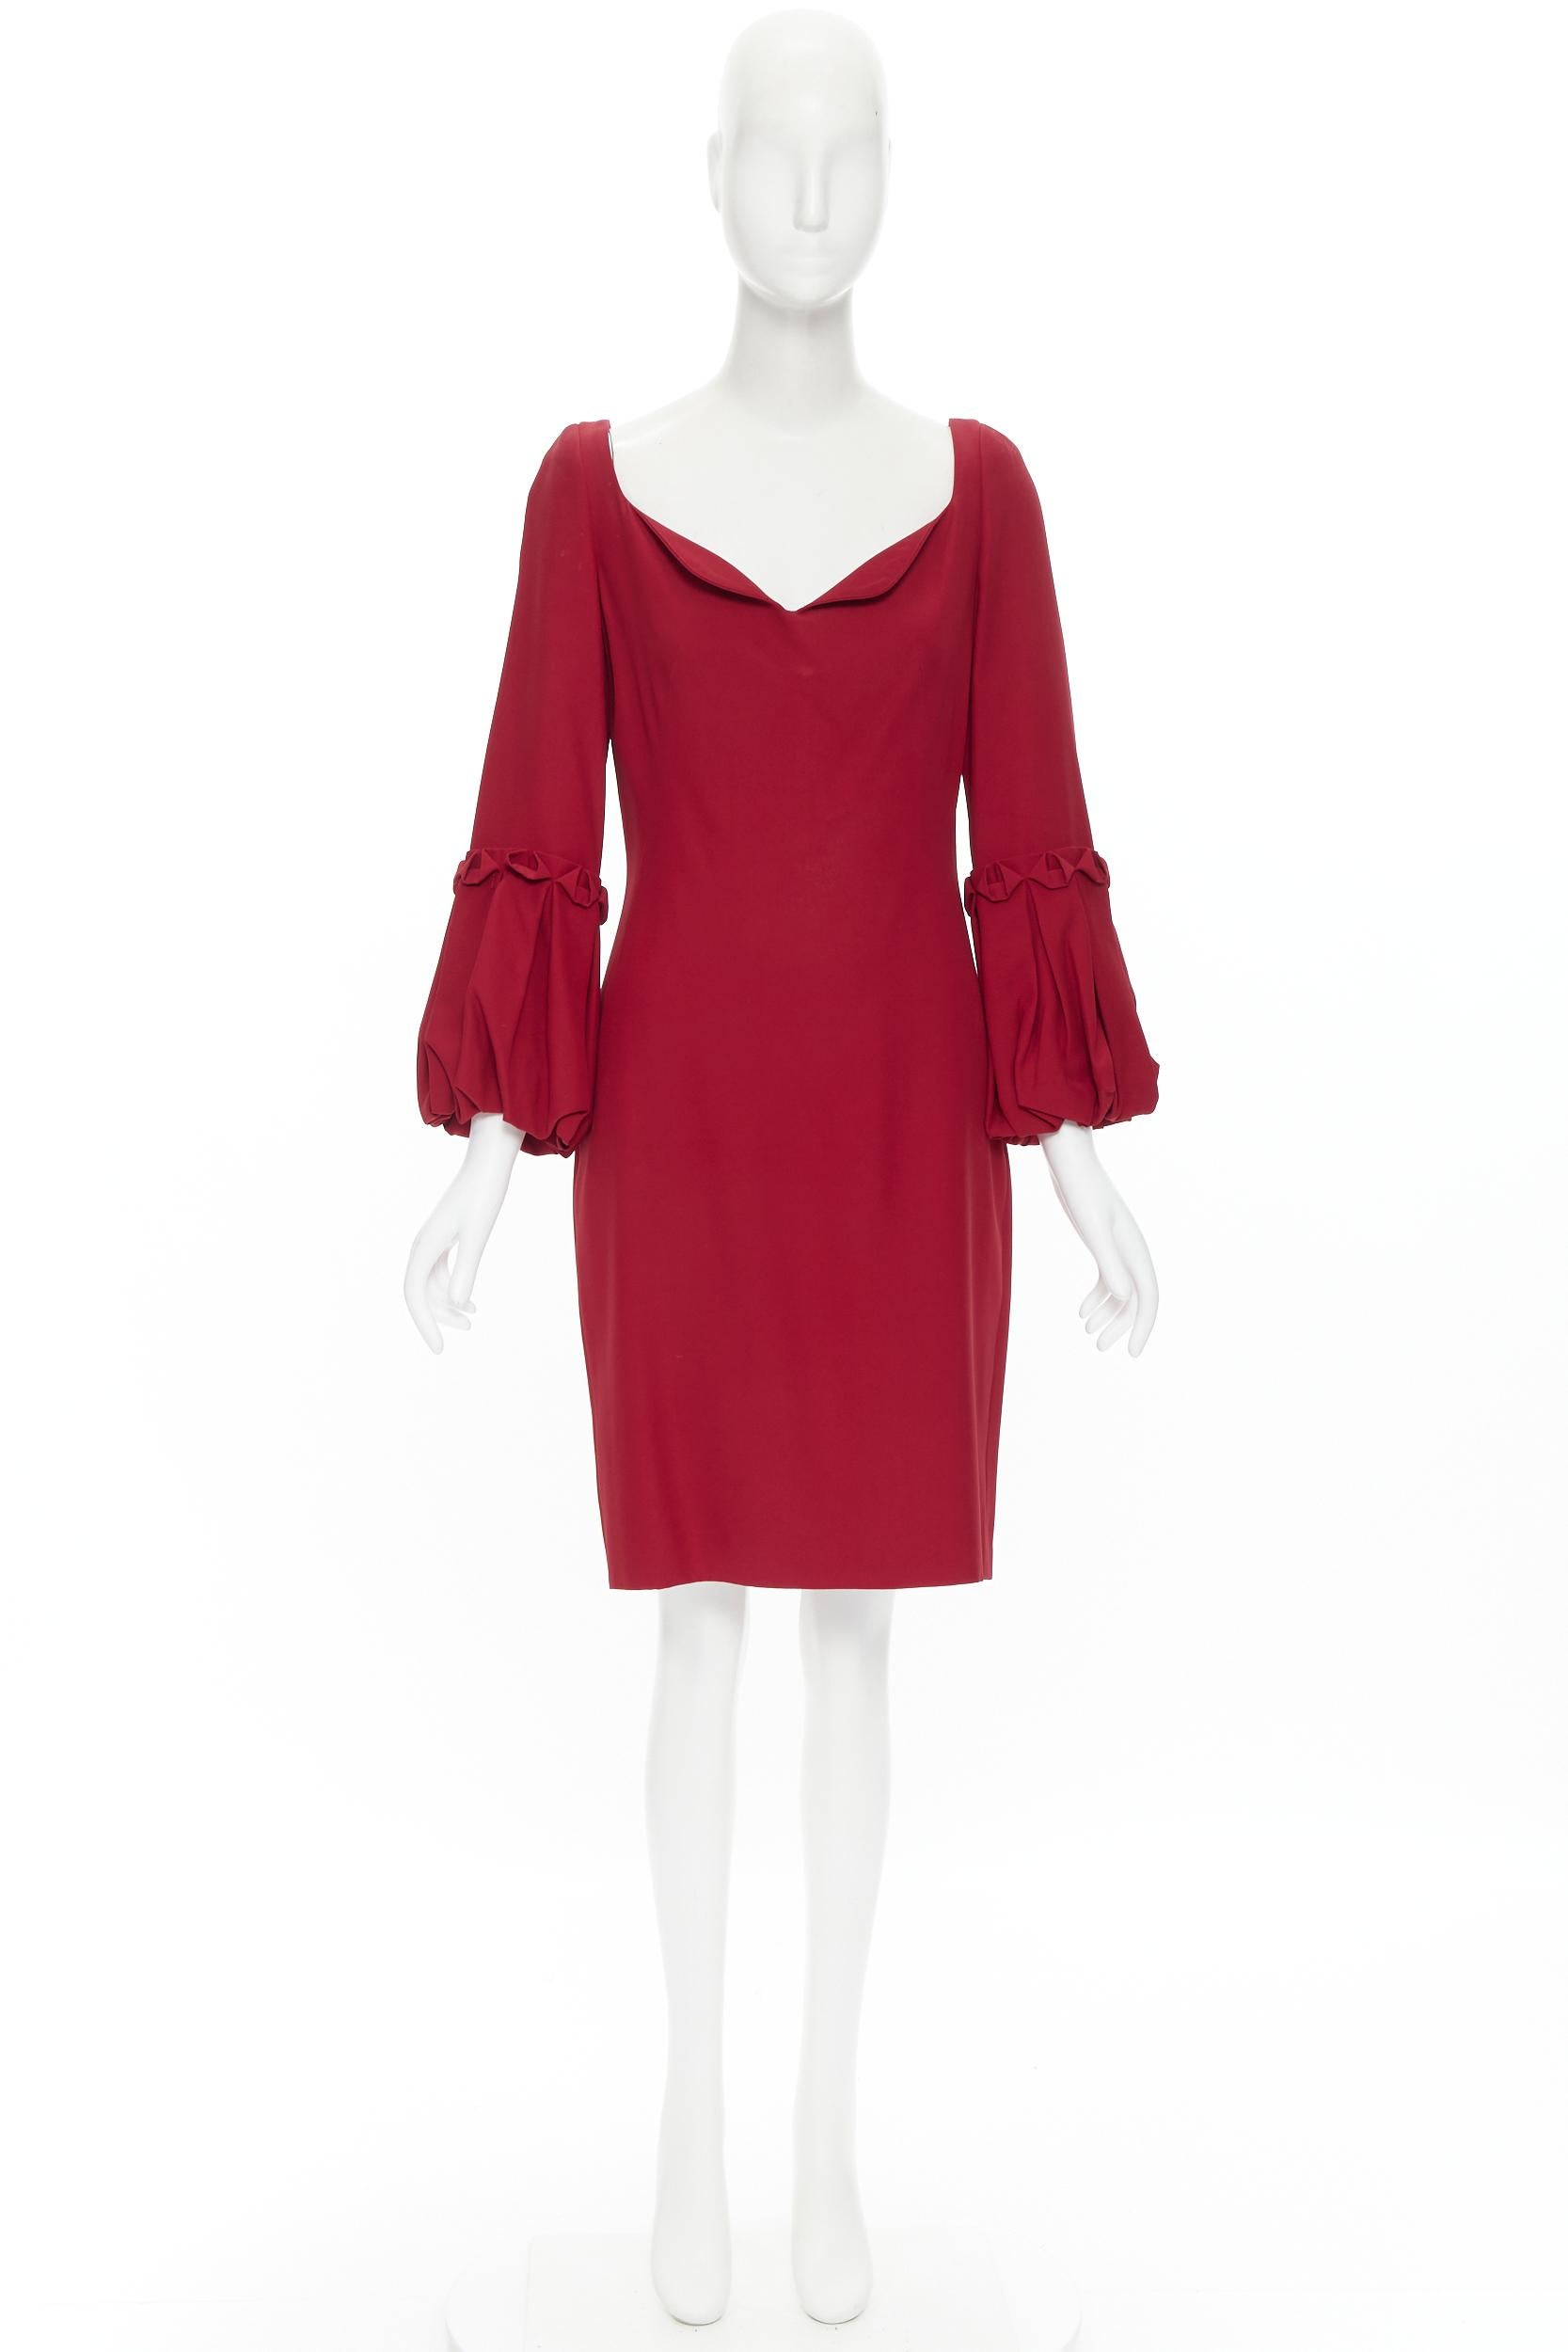 ALEXANDER MCQUEEN red crepe bubble flared cuff cocktail dress IT44 4